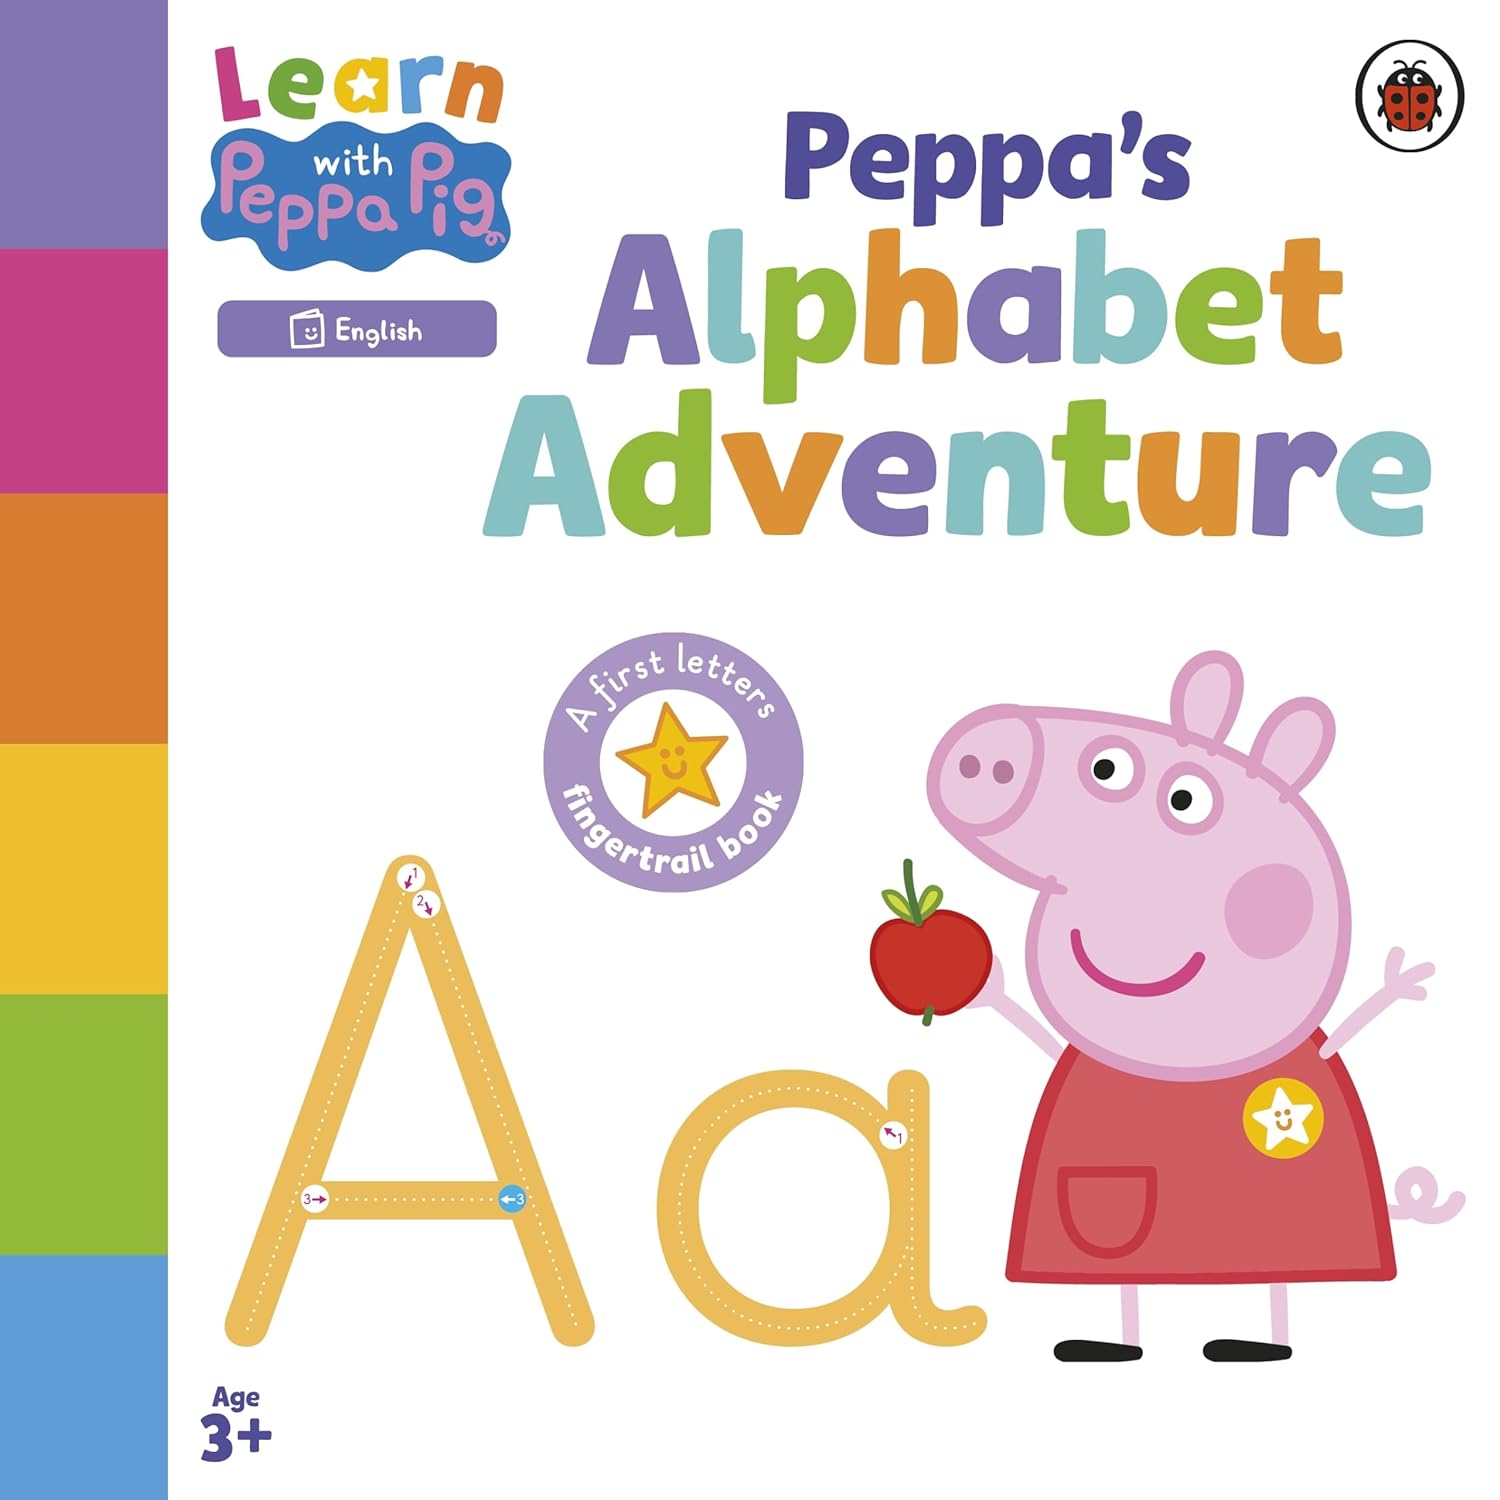 Learn with Peppa Pig: Peppa's Alphabet Adventure